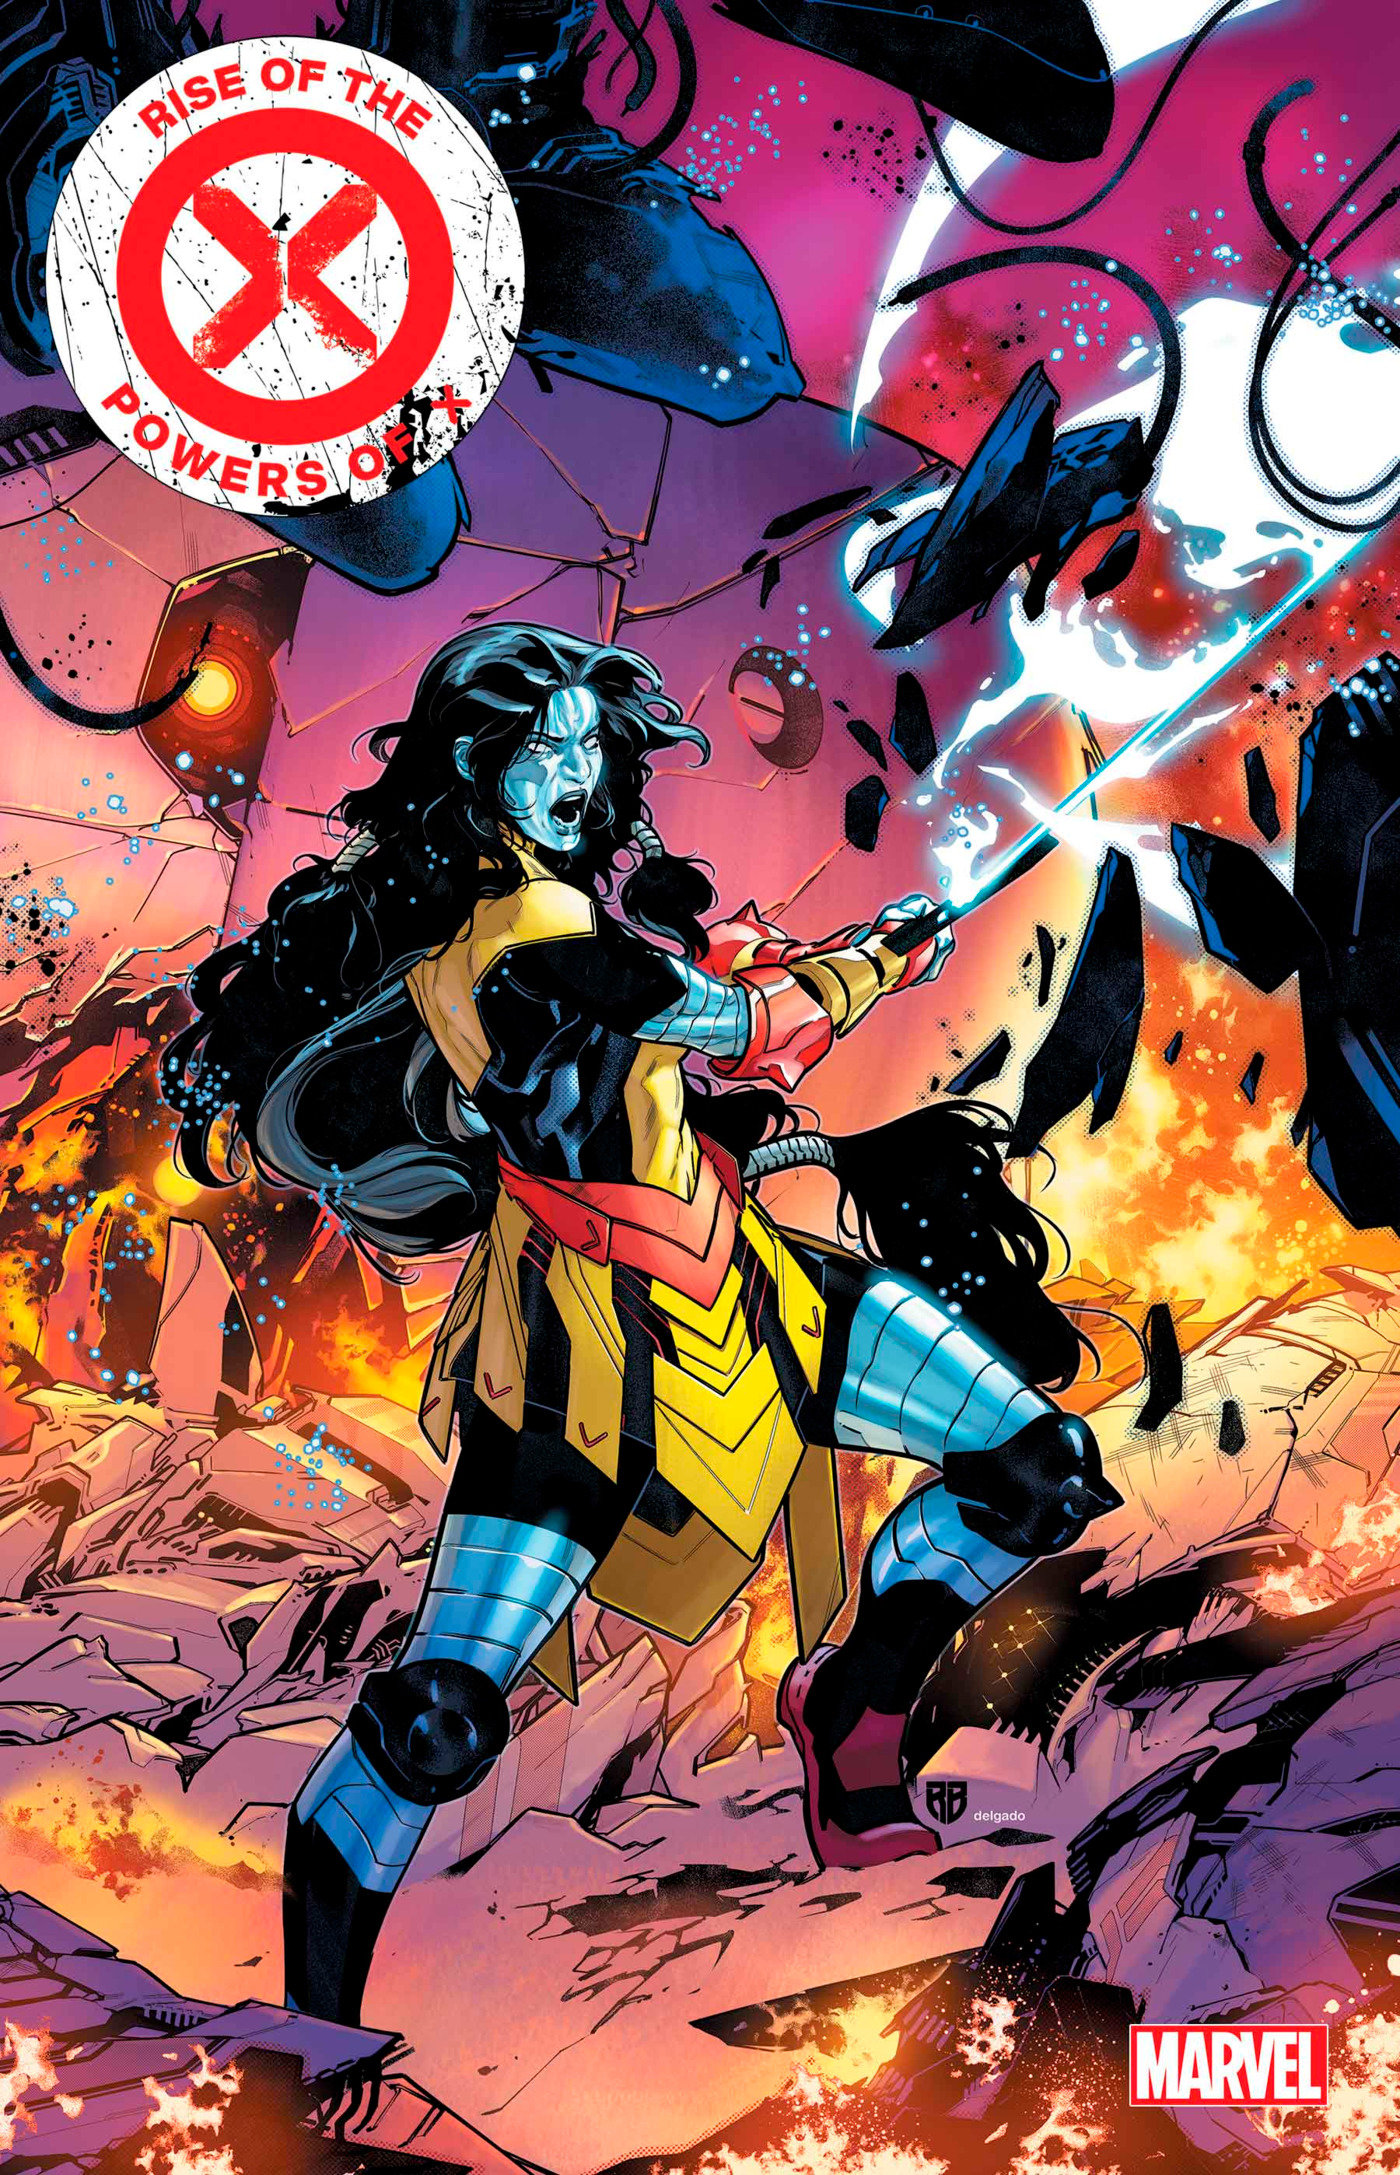 Rise of the Powers of X #2 (Fall of the House of X)